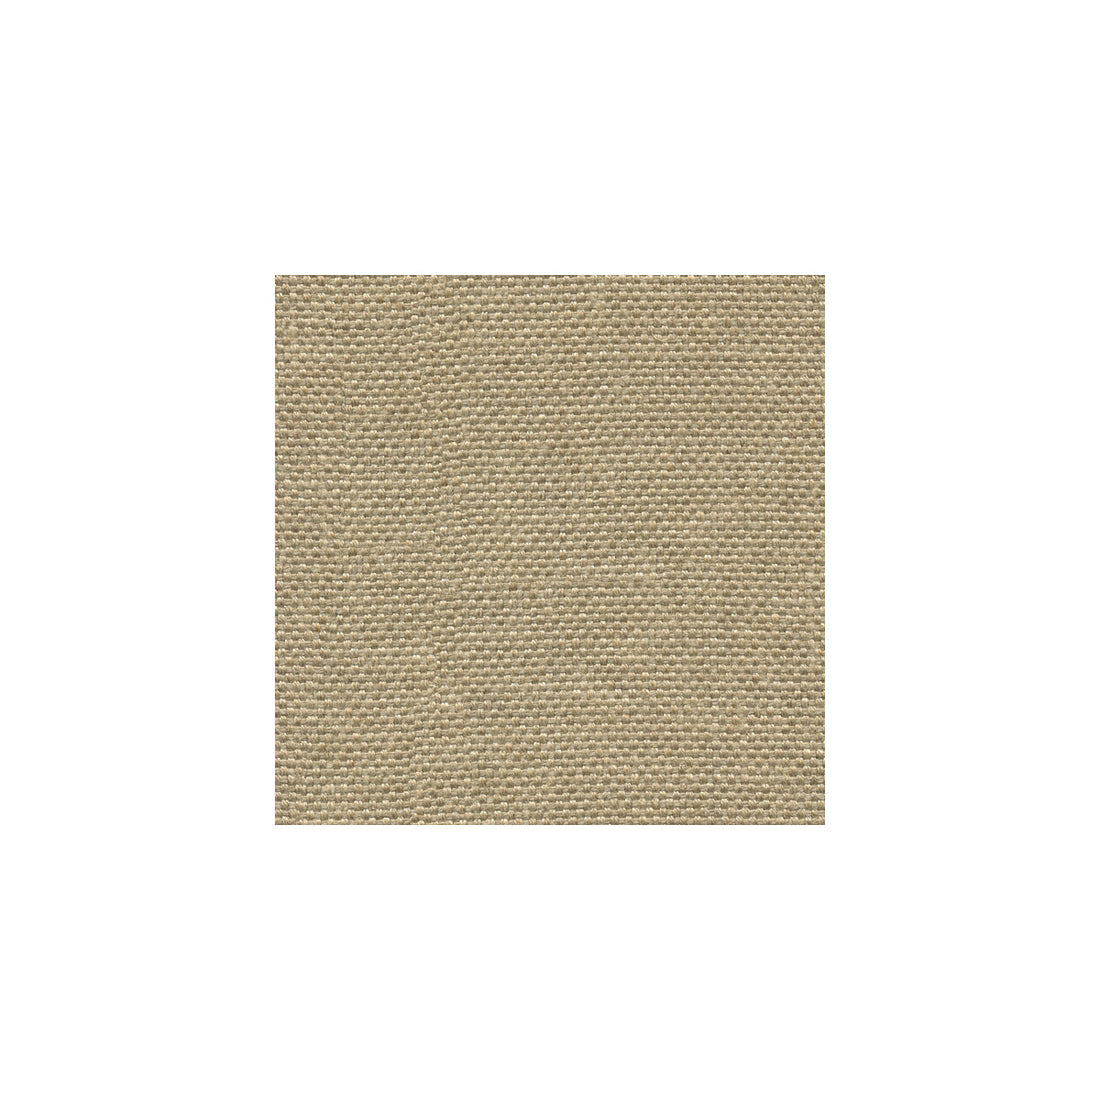 Softened Linen fabric in natural color - pattern 32071.16.0 - by Kravet Couture in the Modern Colors III collection